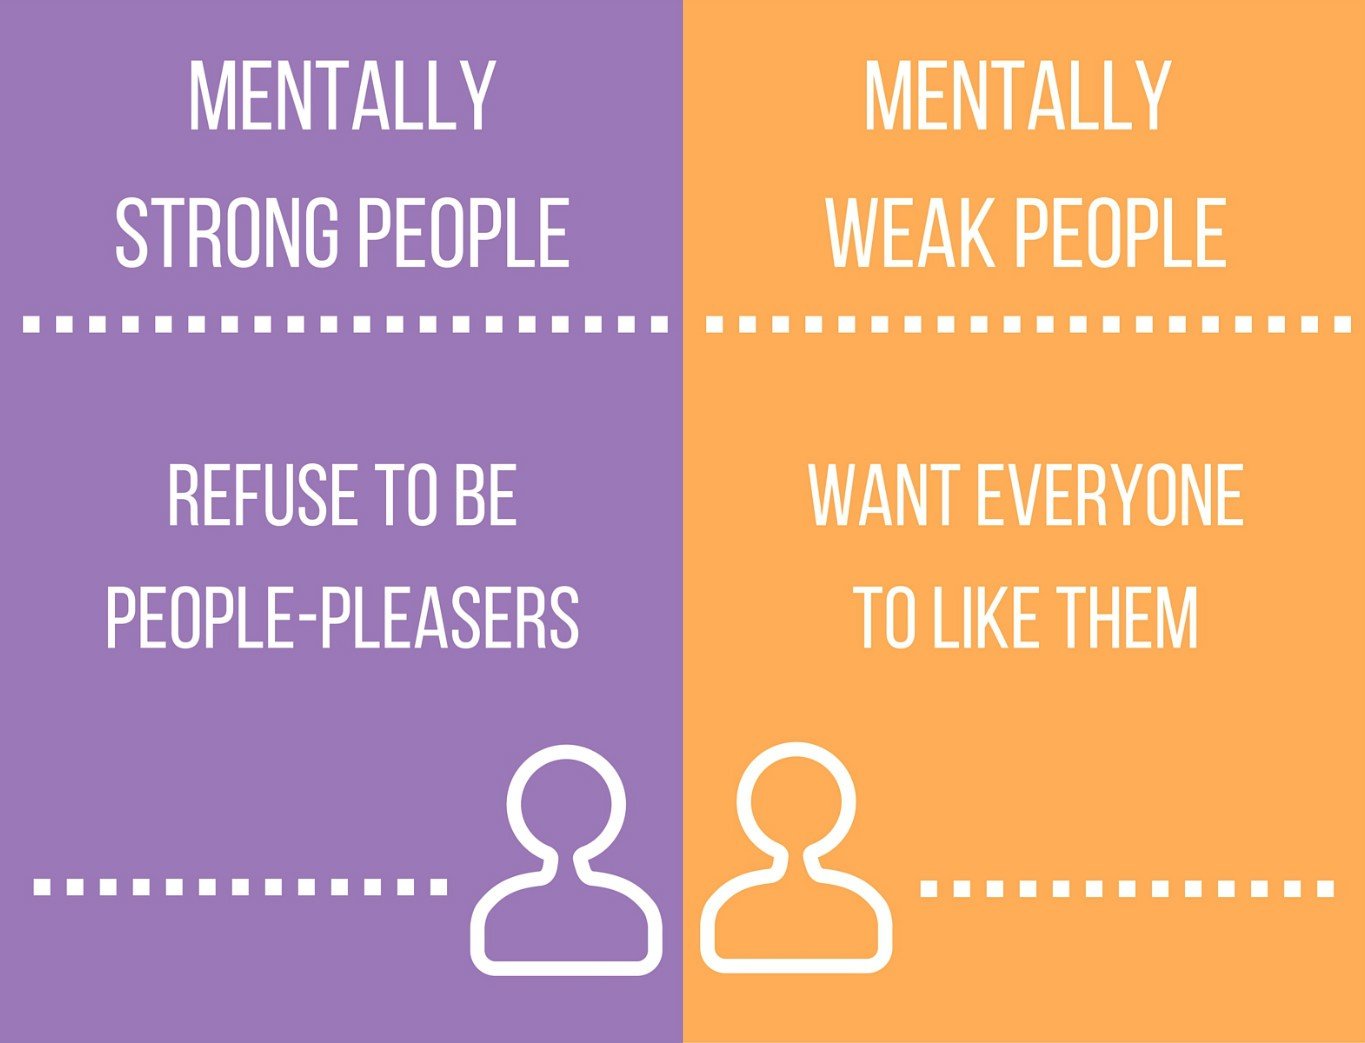 15 Characteristics All Mentally Strong People Share In Common